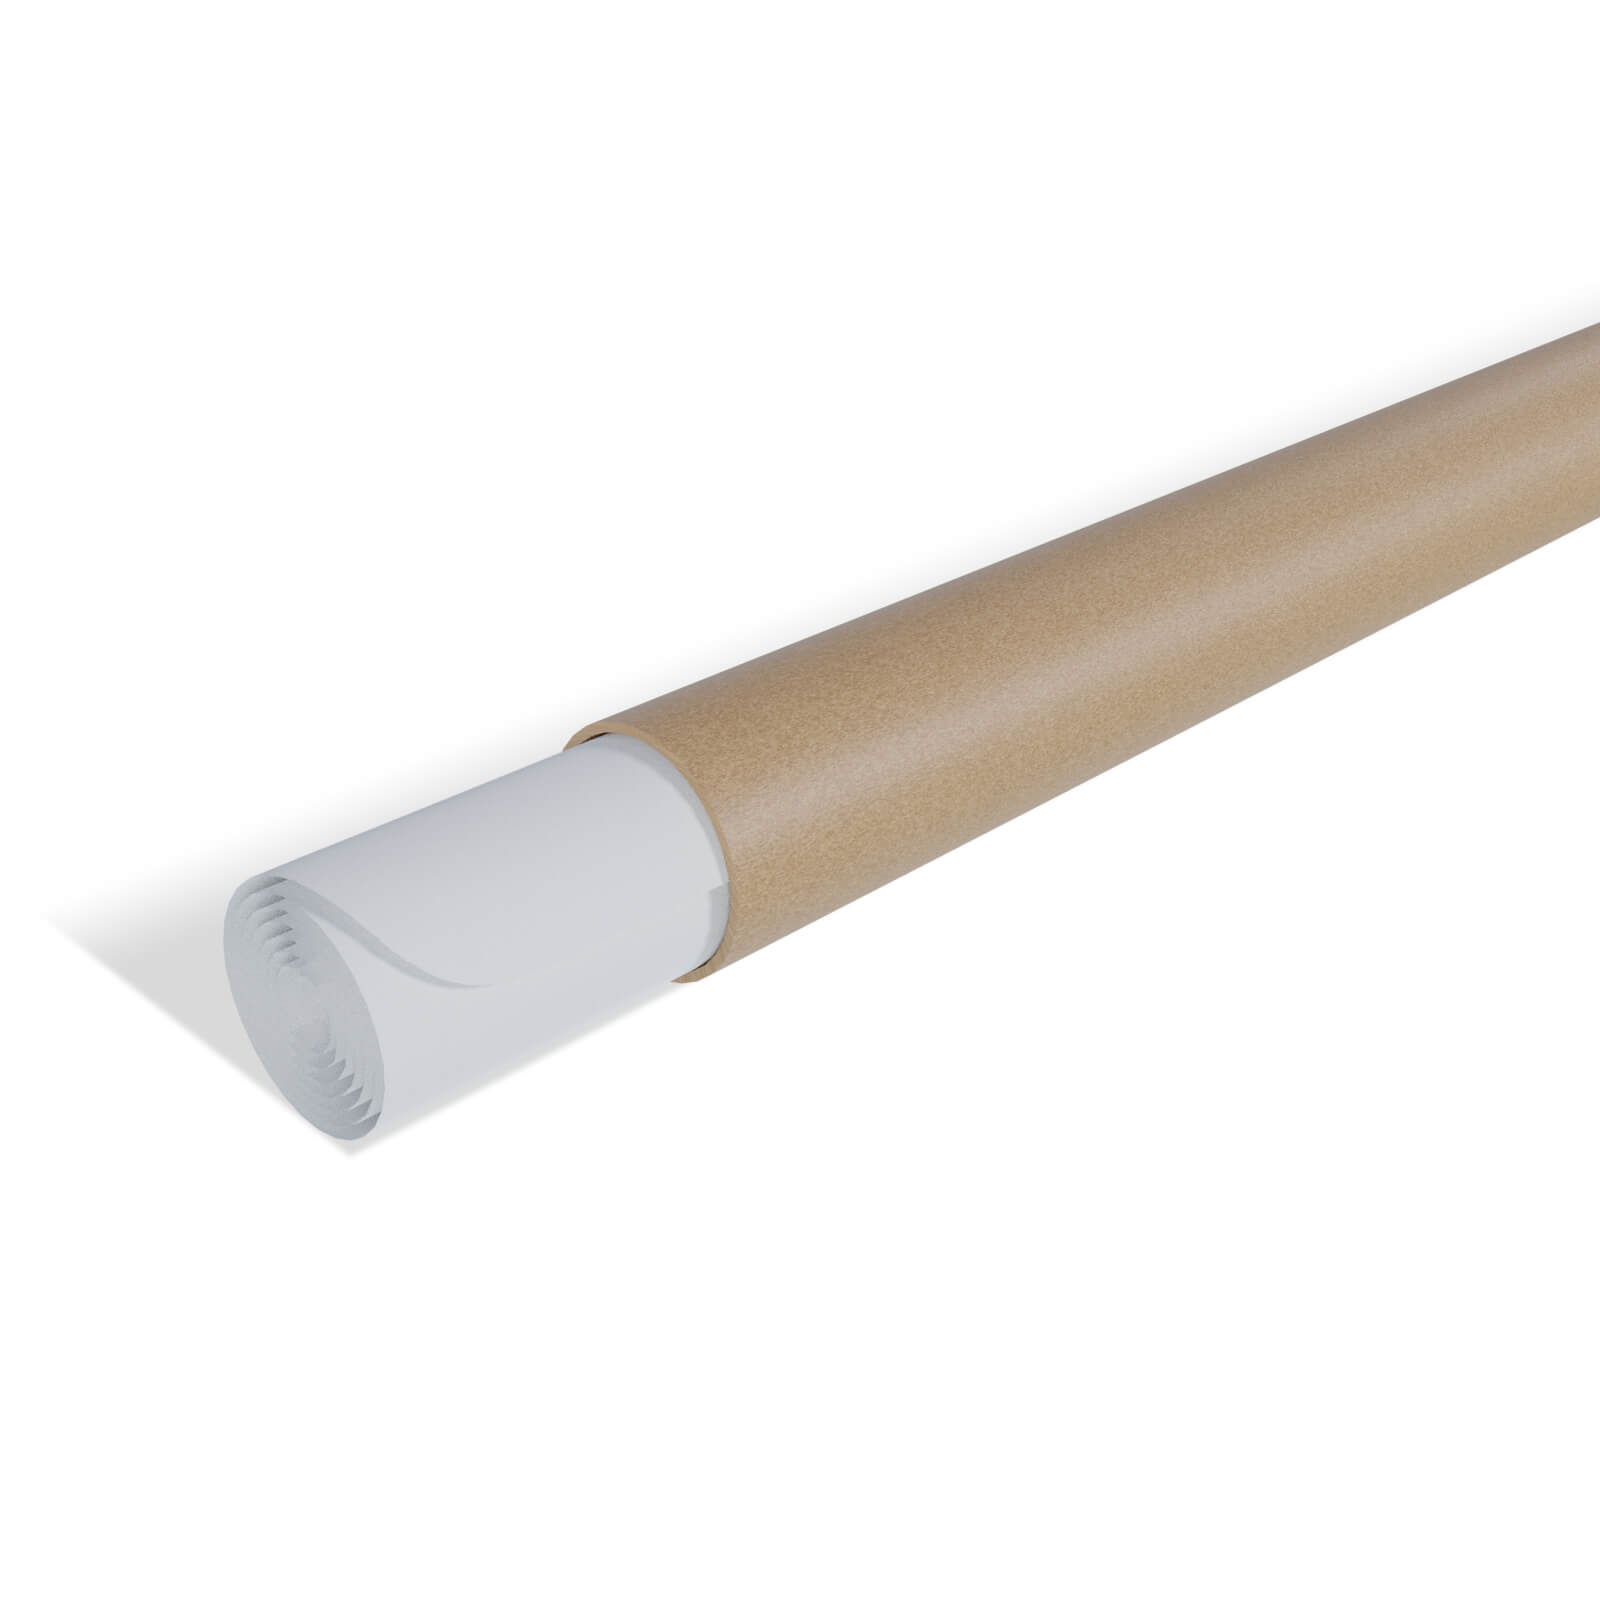 protect-a-sleeve-tube-with-product